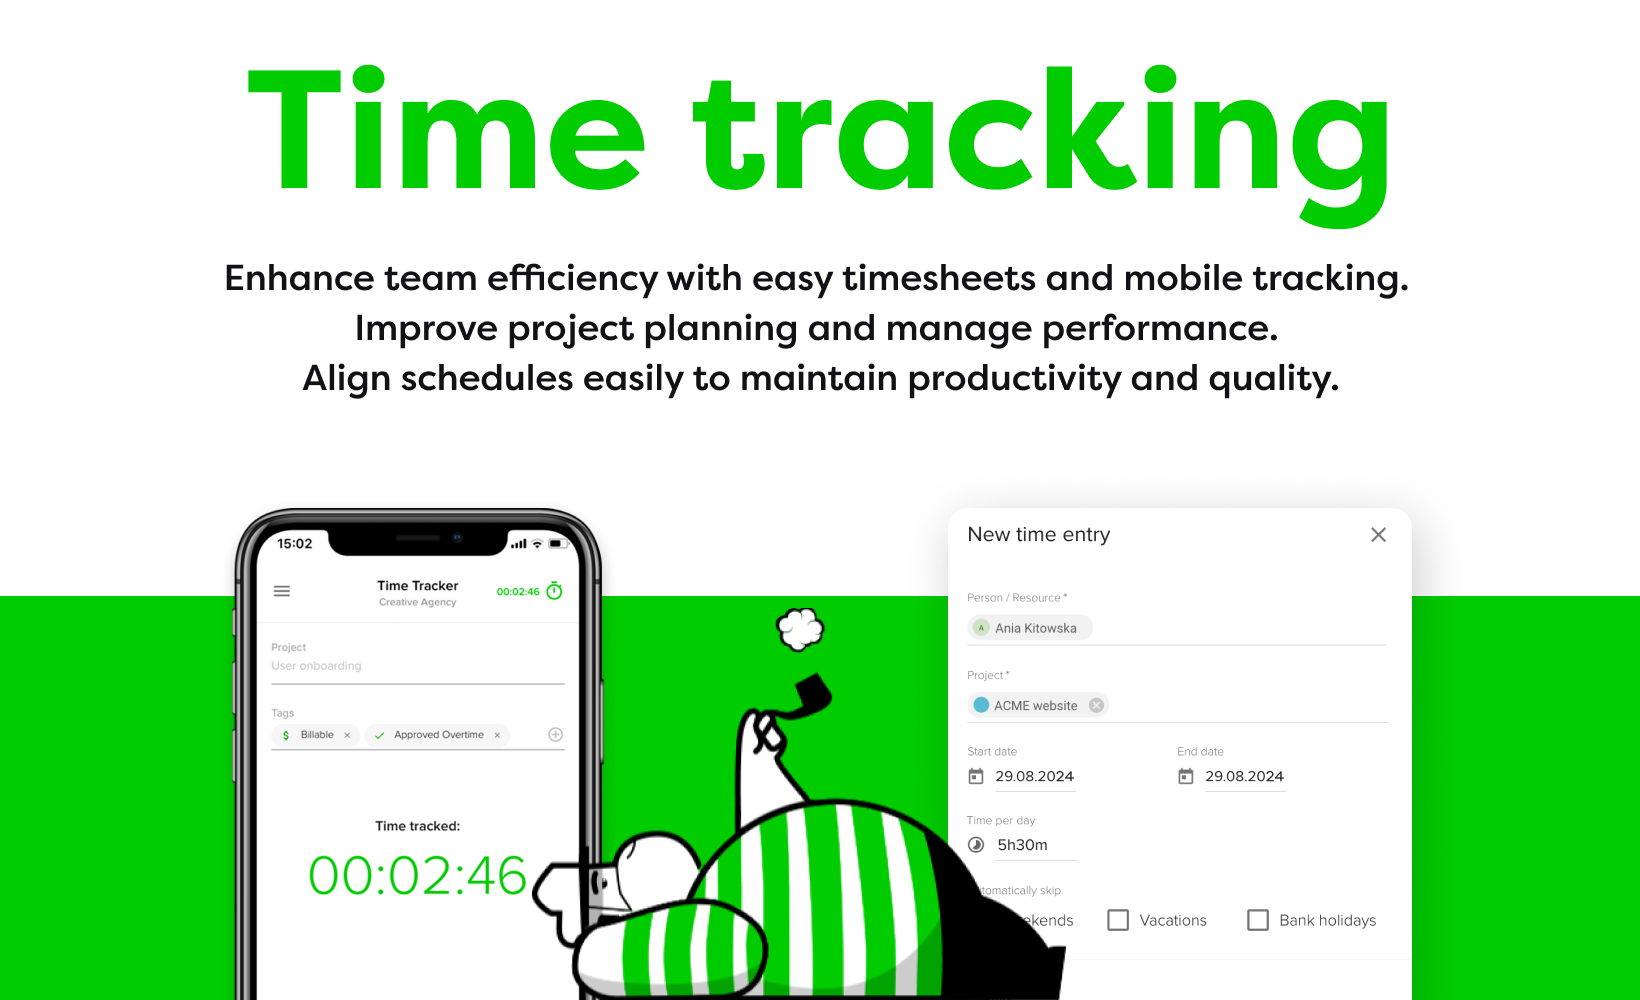 Optimize team efficiency with easy-to-use timesheets and mobile tracking. 
Ensure precise project planning and performance management. 
